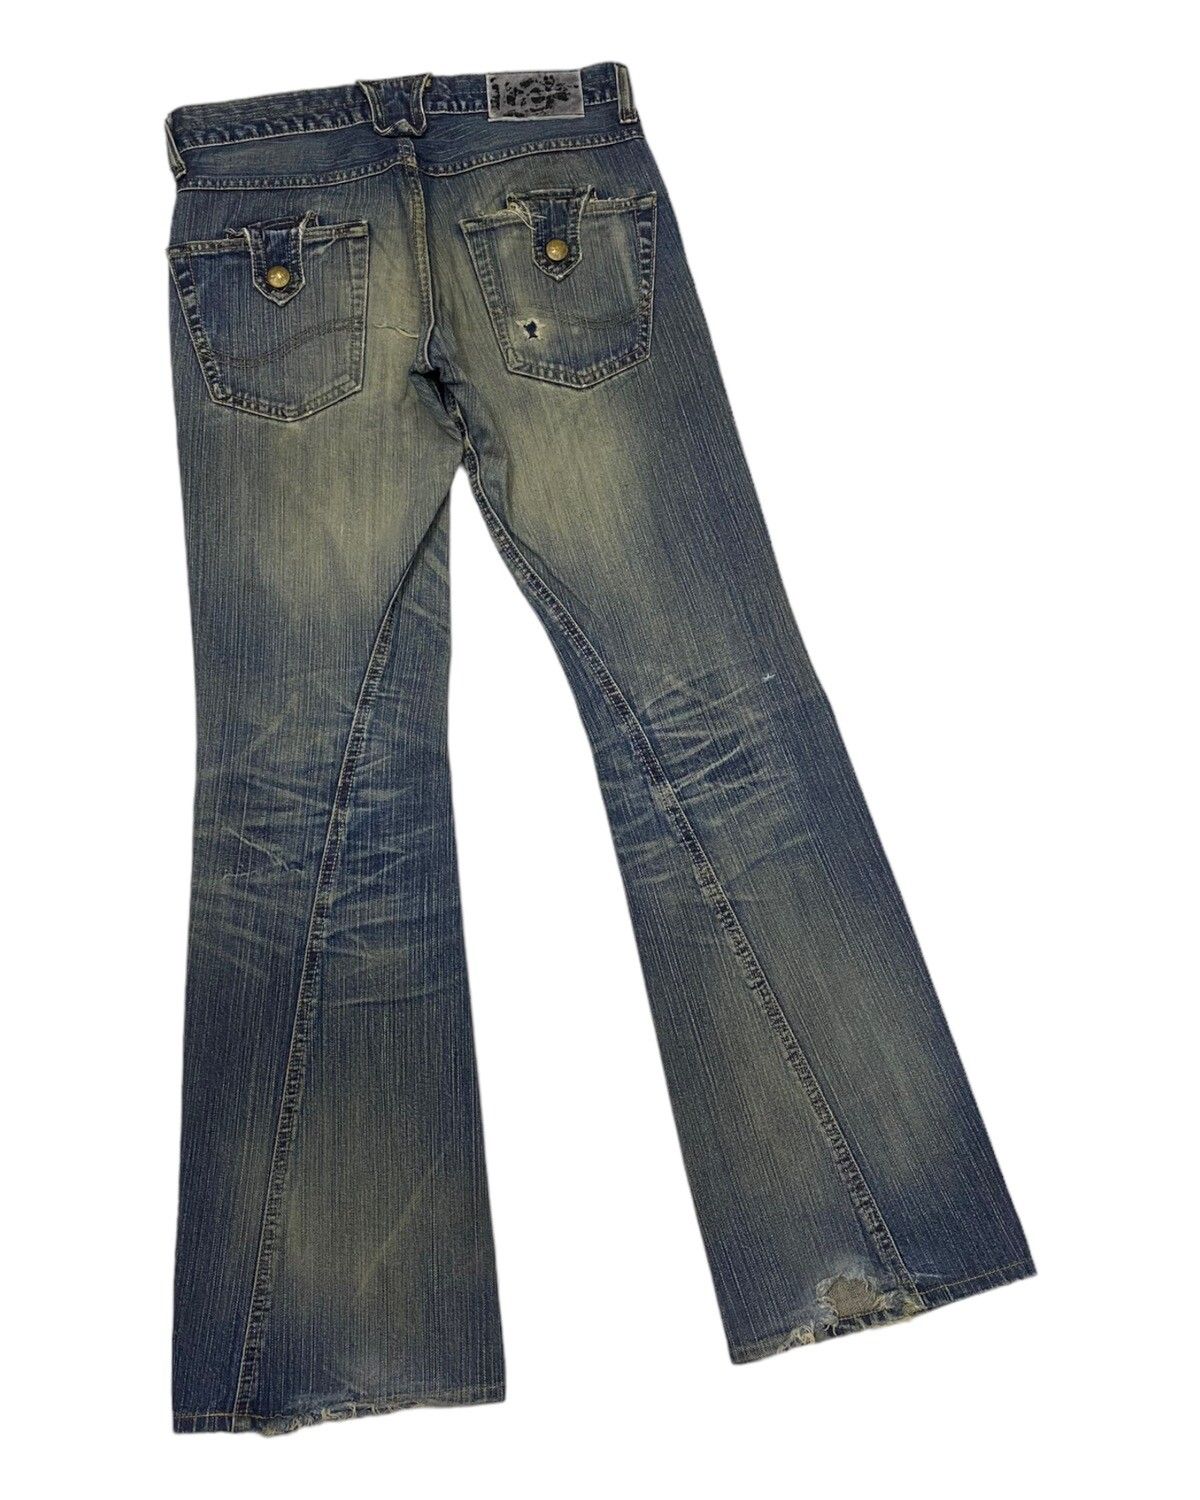 🔥LEE FLARE TWISTED DISTRESSED DENIM JEANS BOOTCUT FLARED - 4